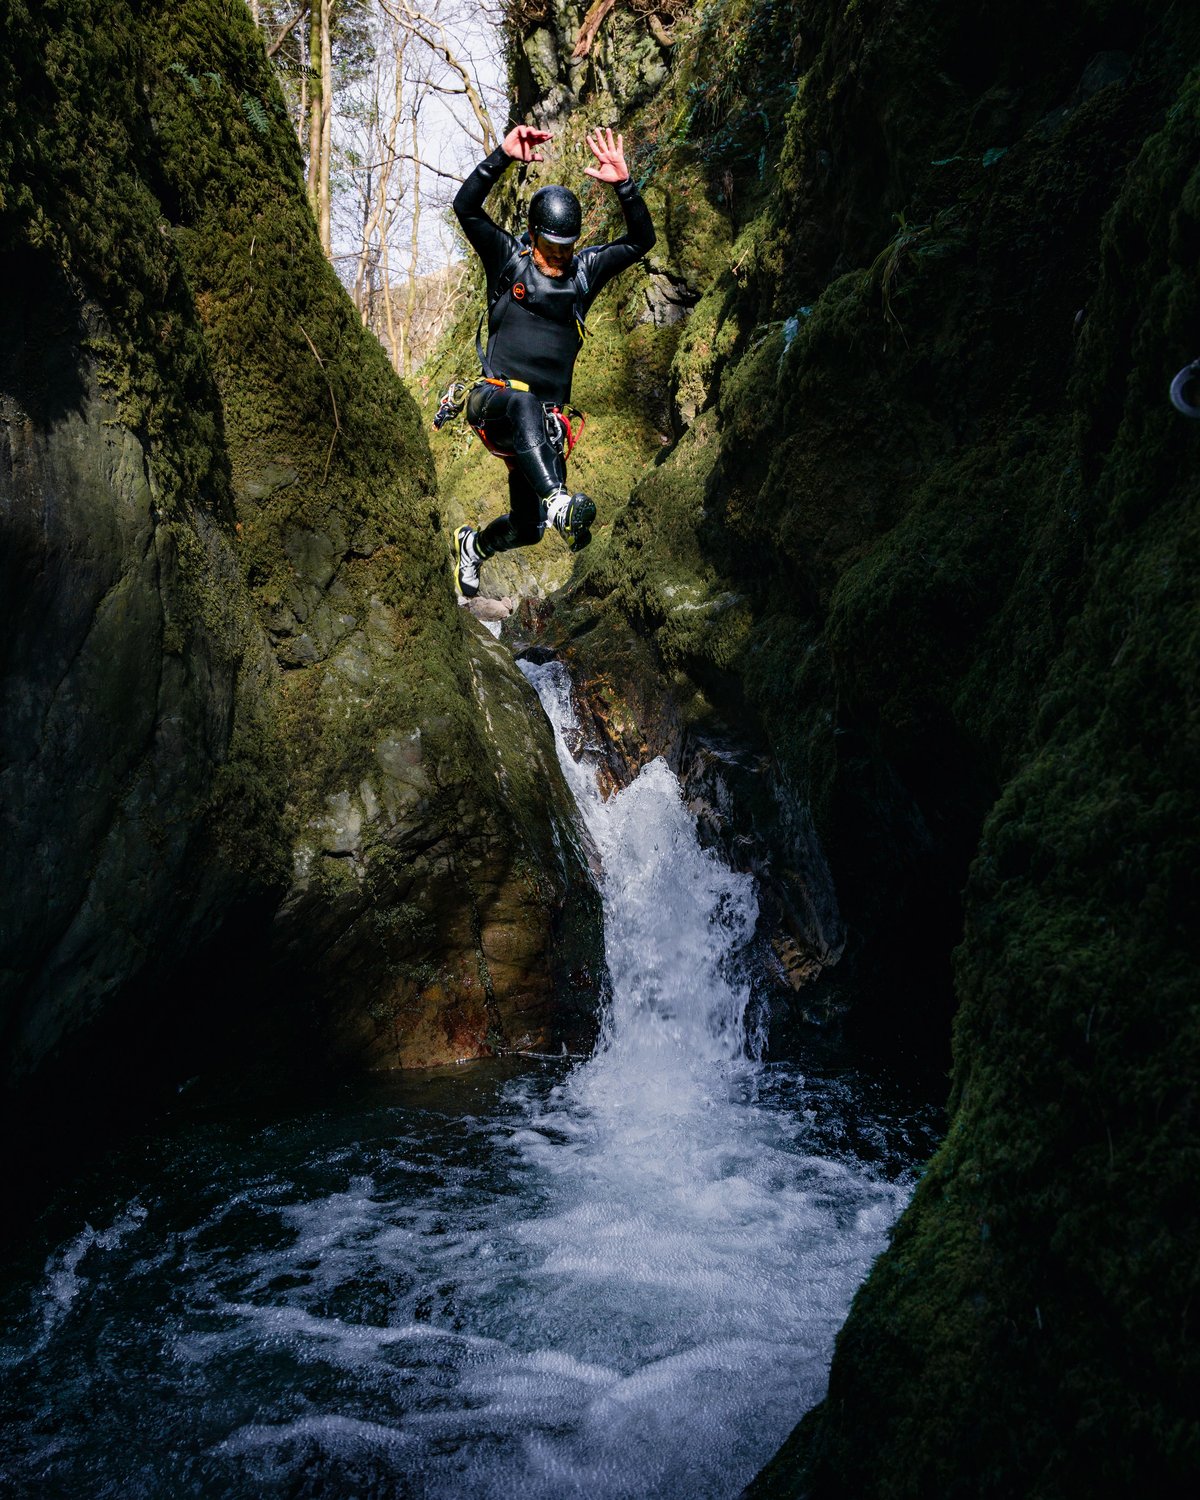 Experience the thrill of canyoning near Edinburgh and Glansgow with our small-group tours. Led by experienced guides, you'll explore waterfalls, gorges, and rapids in a safe and fun environment.